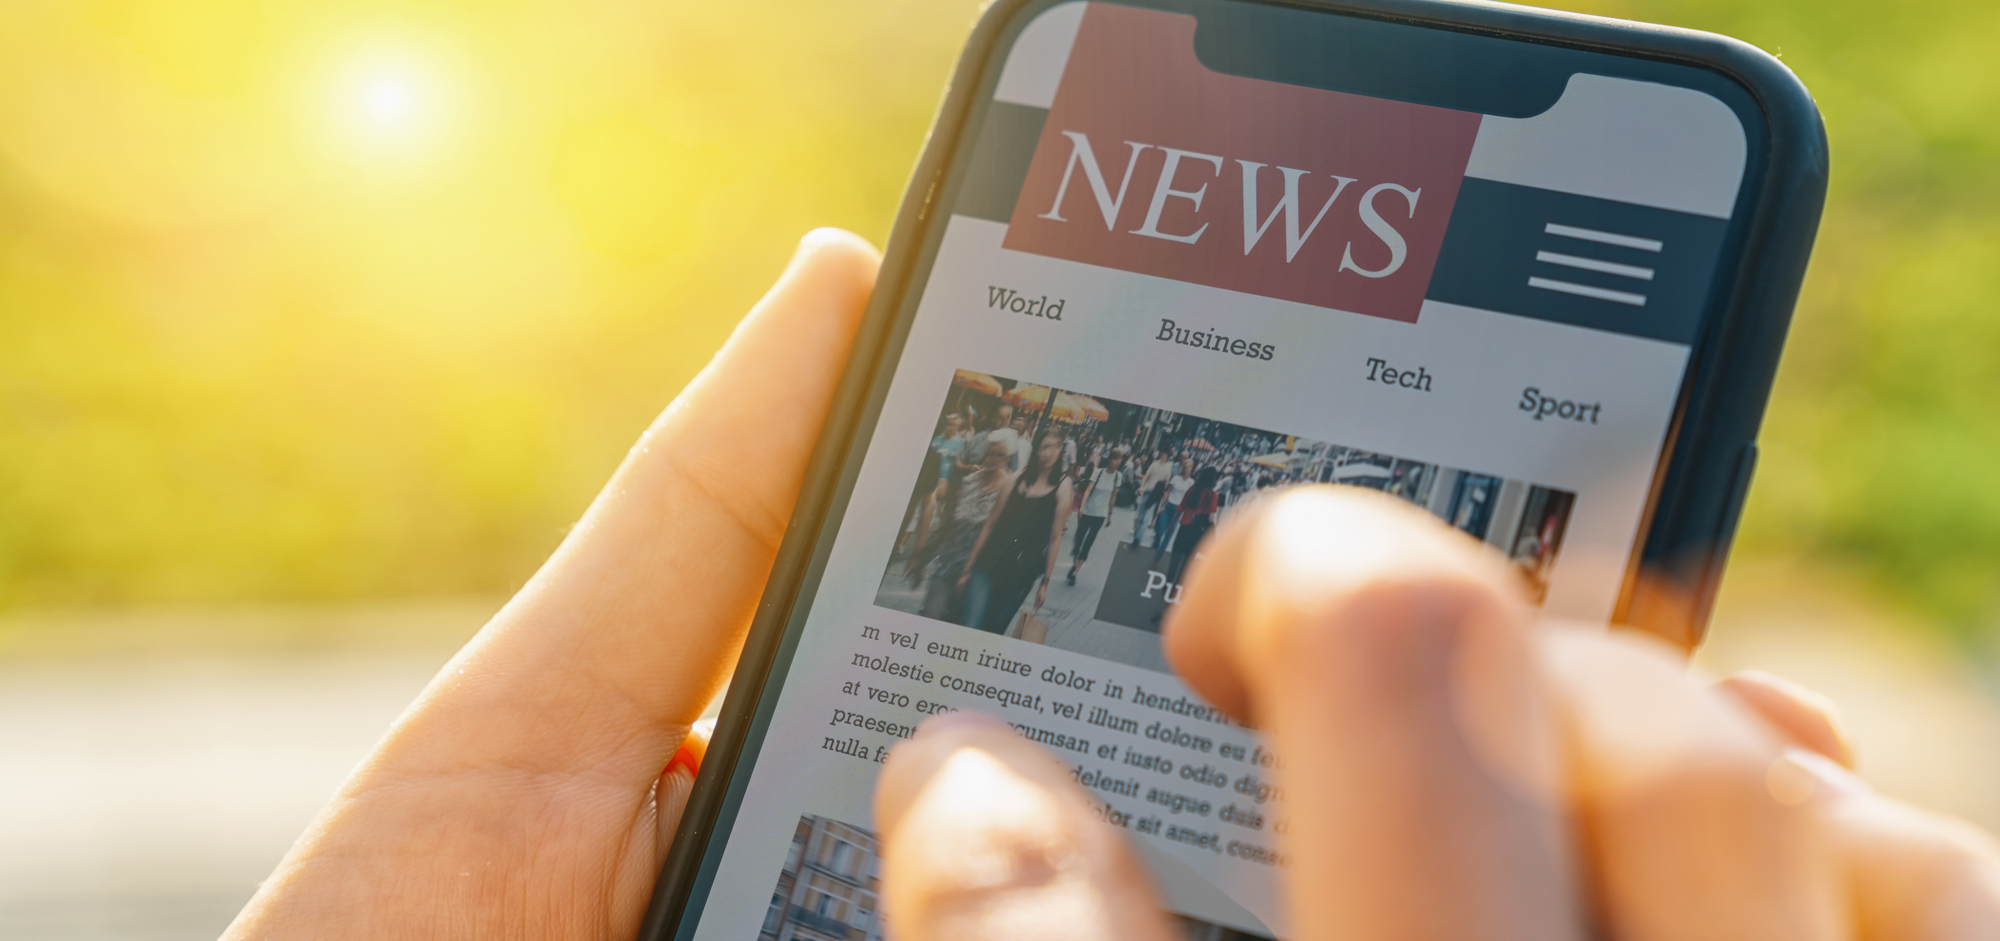 A person holds a phone displaying a news app. News apps are a great way to learn English with current events.